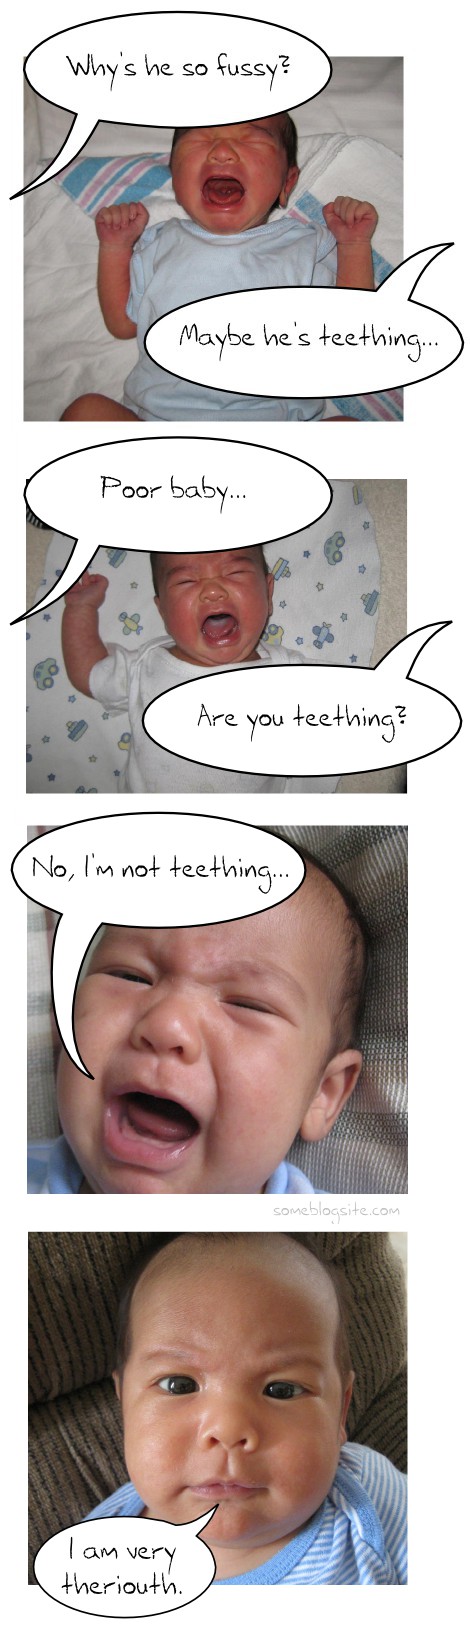 comic about a child who is not teething but is rather serious instead